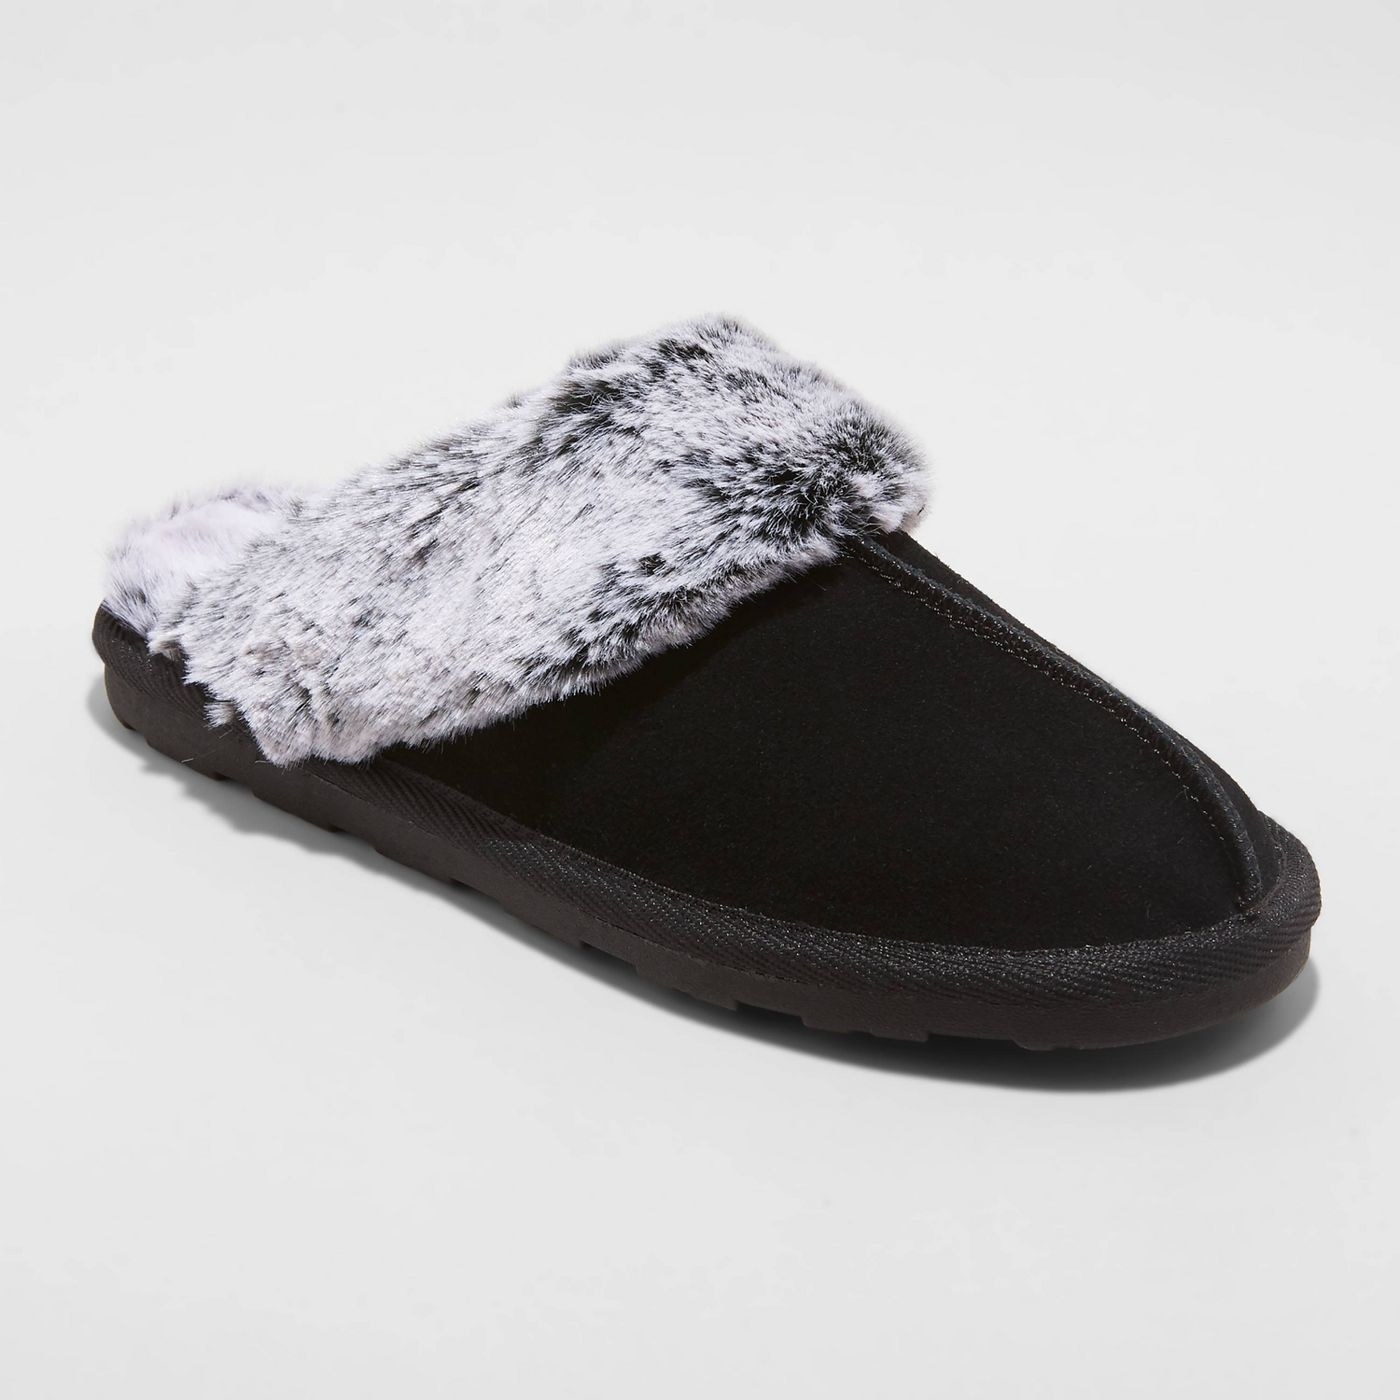 A pair of black slipper with faux grey fur